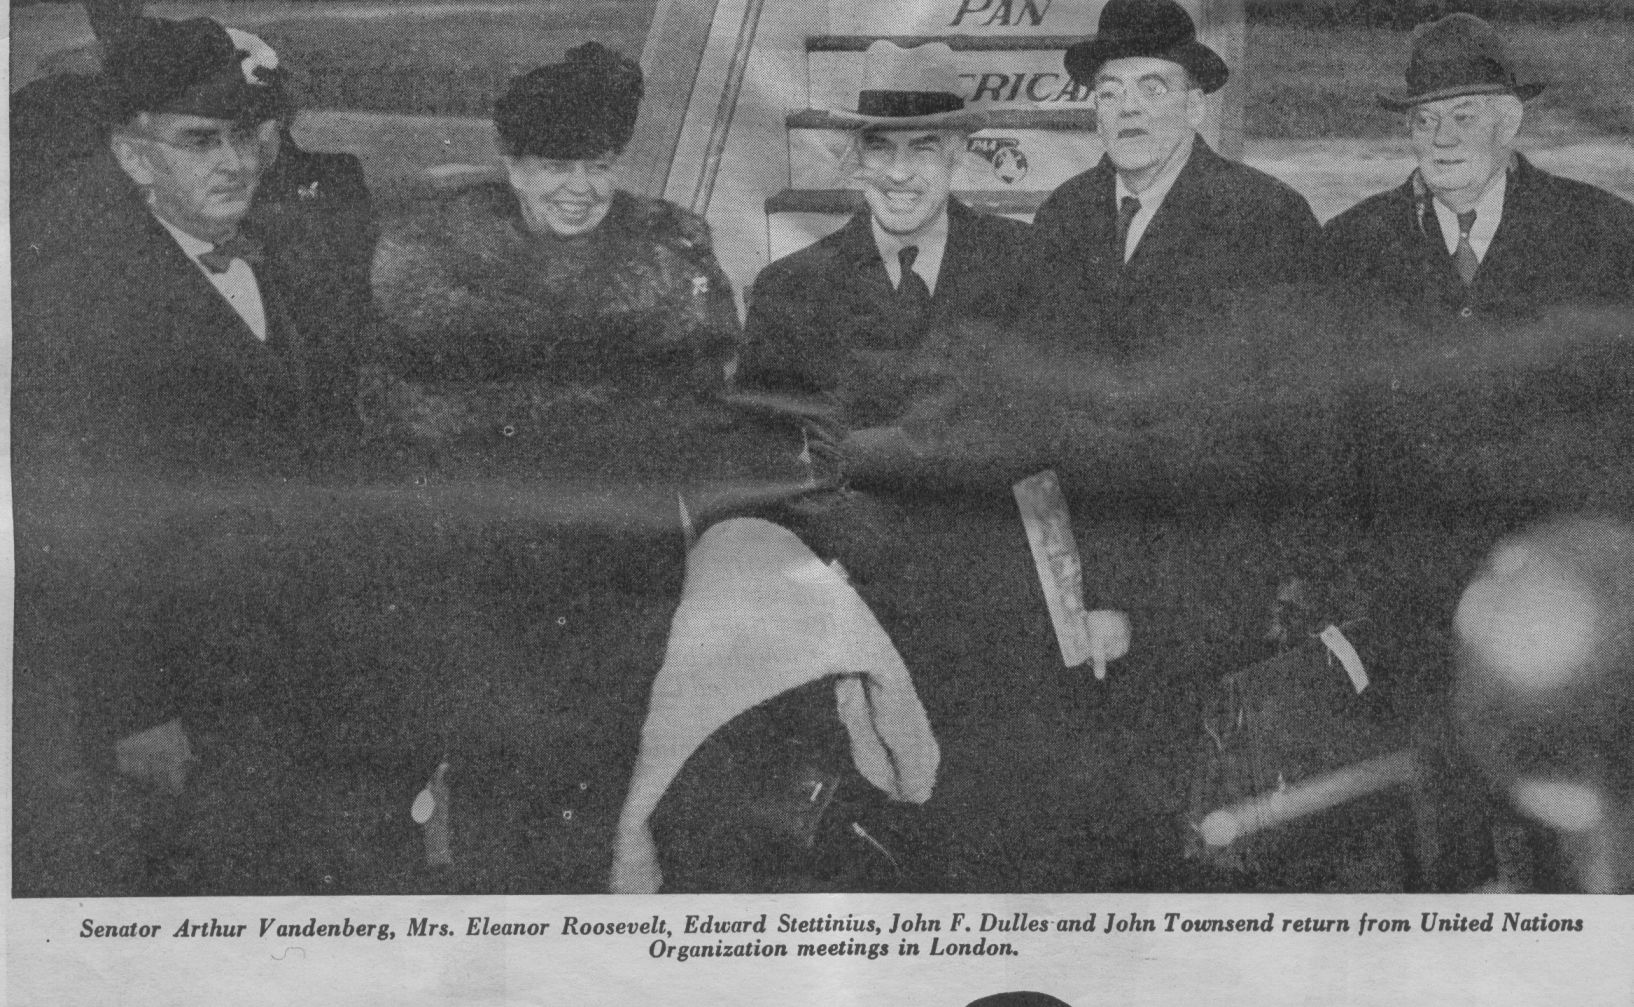 1946 Eleanor Roosevelt & party pose by Pan Am Clipper